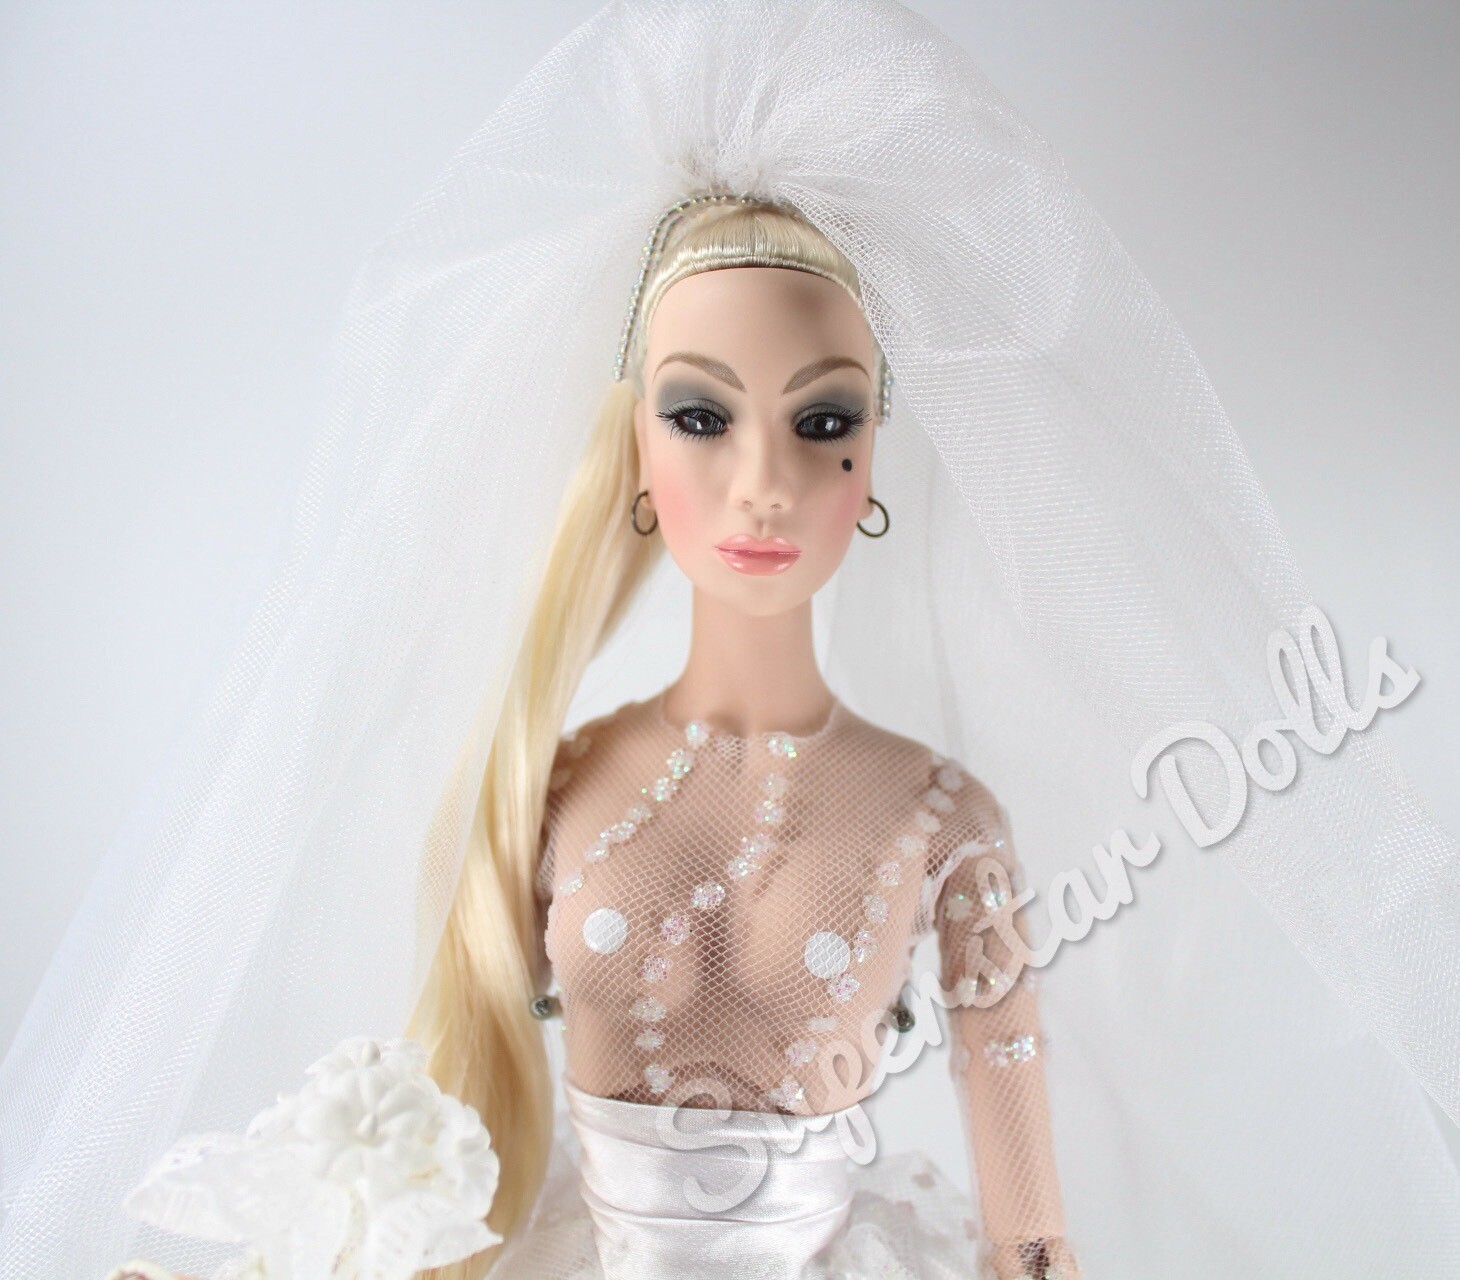 2009 Superdoll London: The Sybarites INNOQUII "The Bride" 14.5" DE-BOXED Porcelain Dressed Fashion Doll